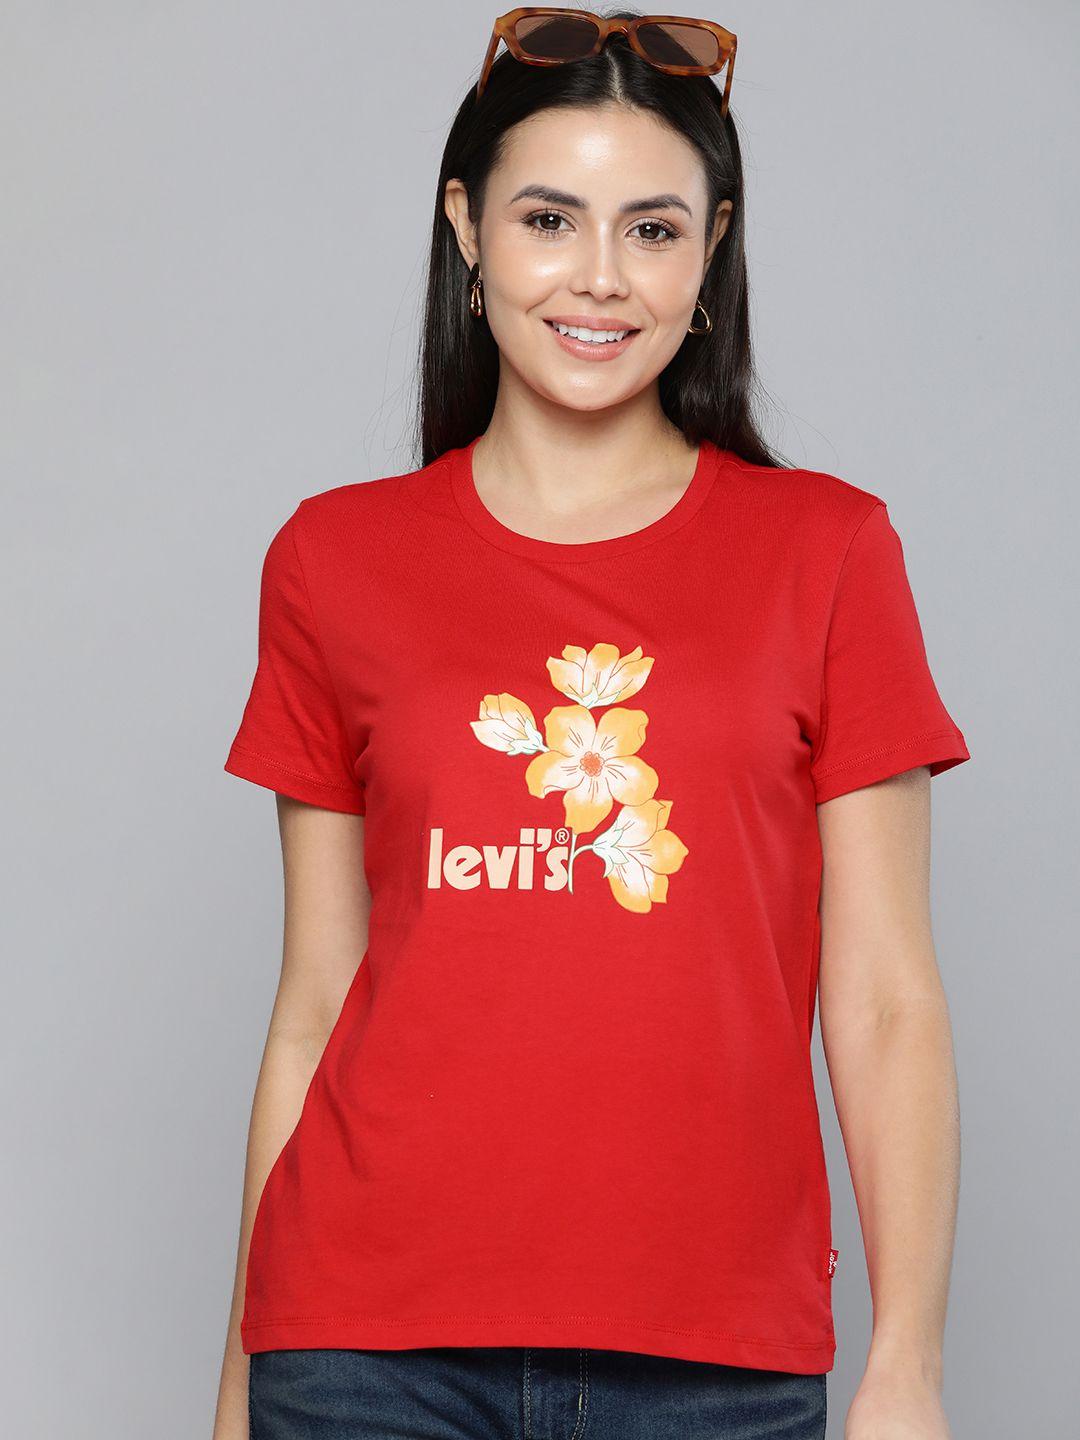 levis women red floral printed pure cotton t-shirt